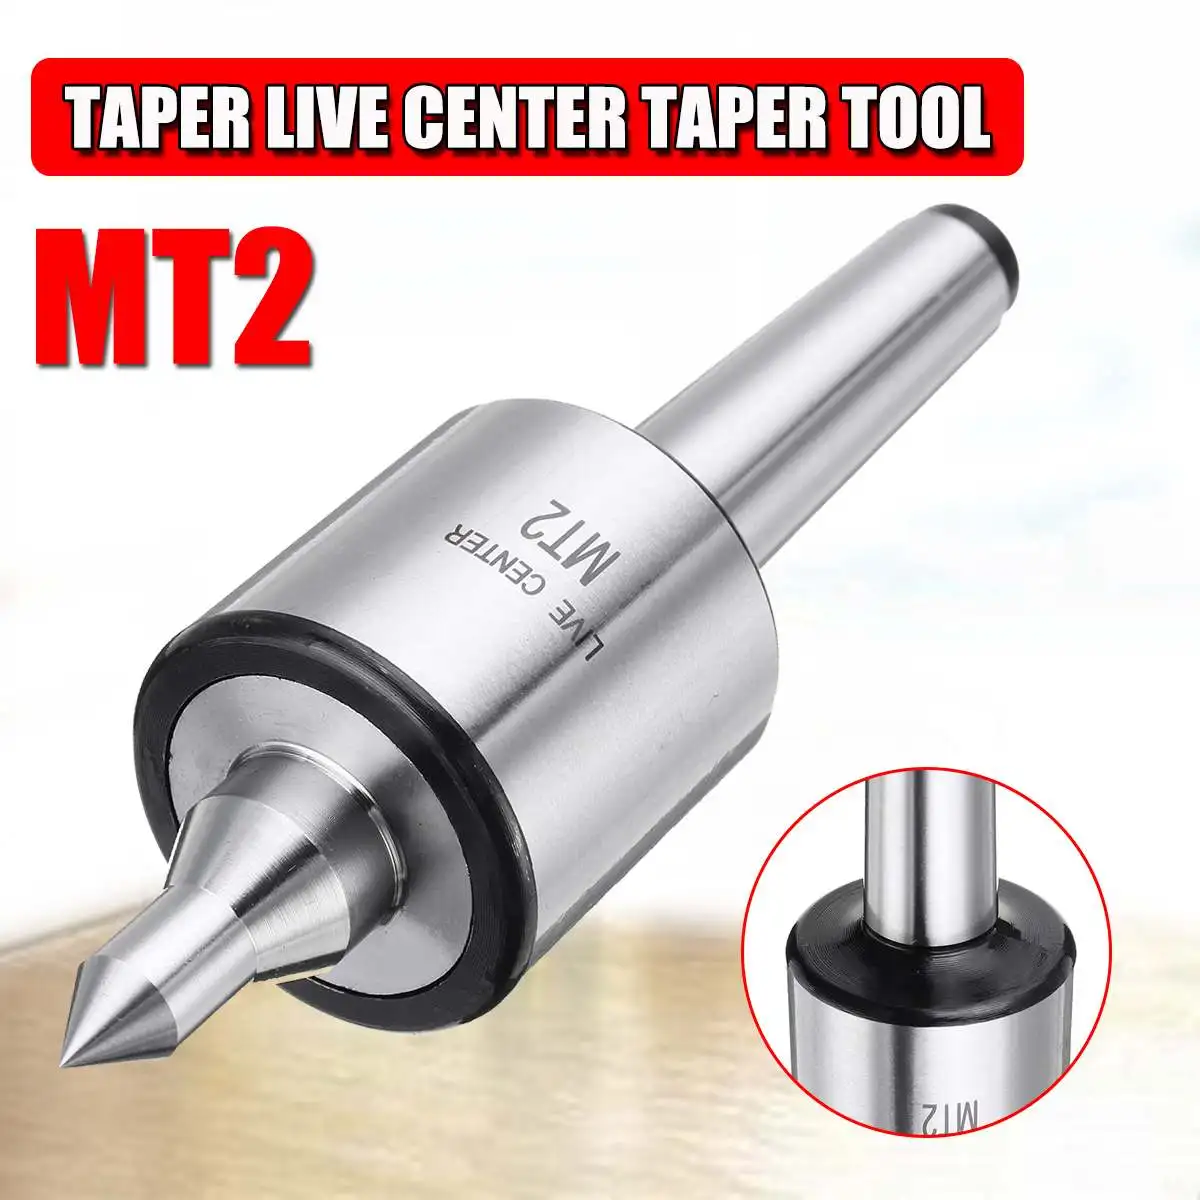 

MT2 0.001 Accuracy 5000rpm Max Steel Lathe Live Center Taper Tool Triple Bearing CNC Live Revolving Milling Center Taper Machine